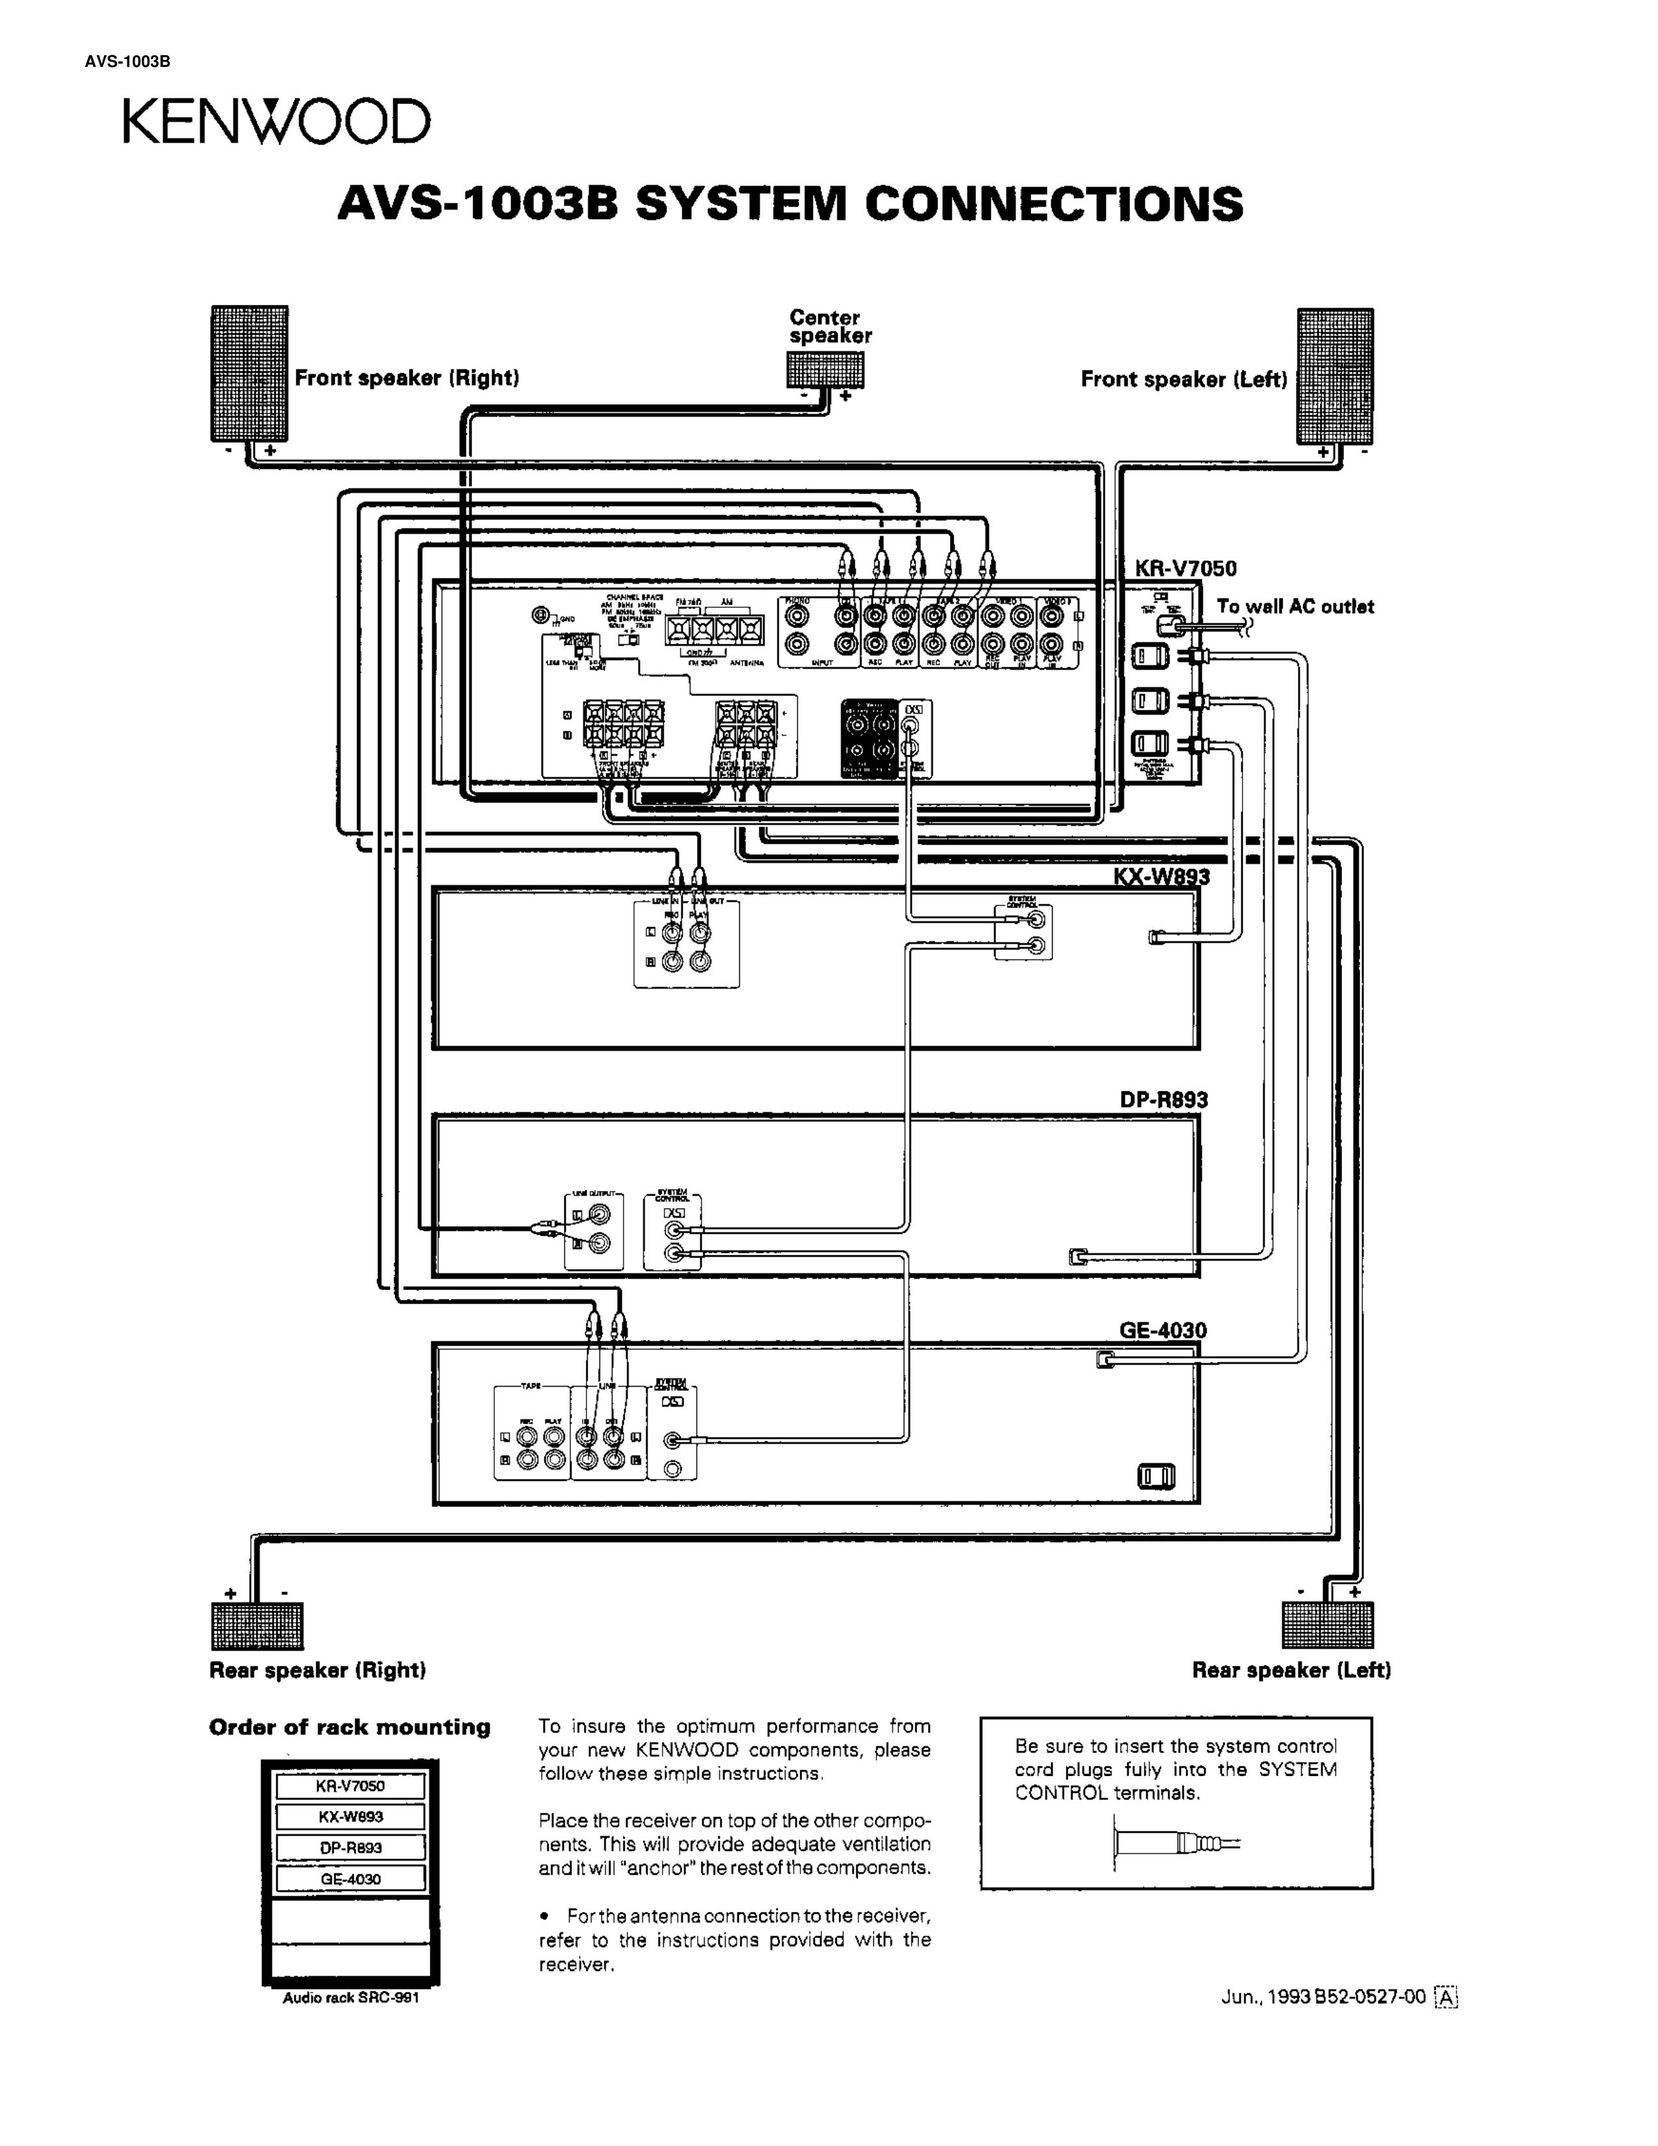 Kenwood AVS-1003B Home Theater System User Manual